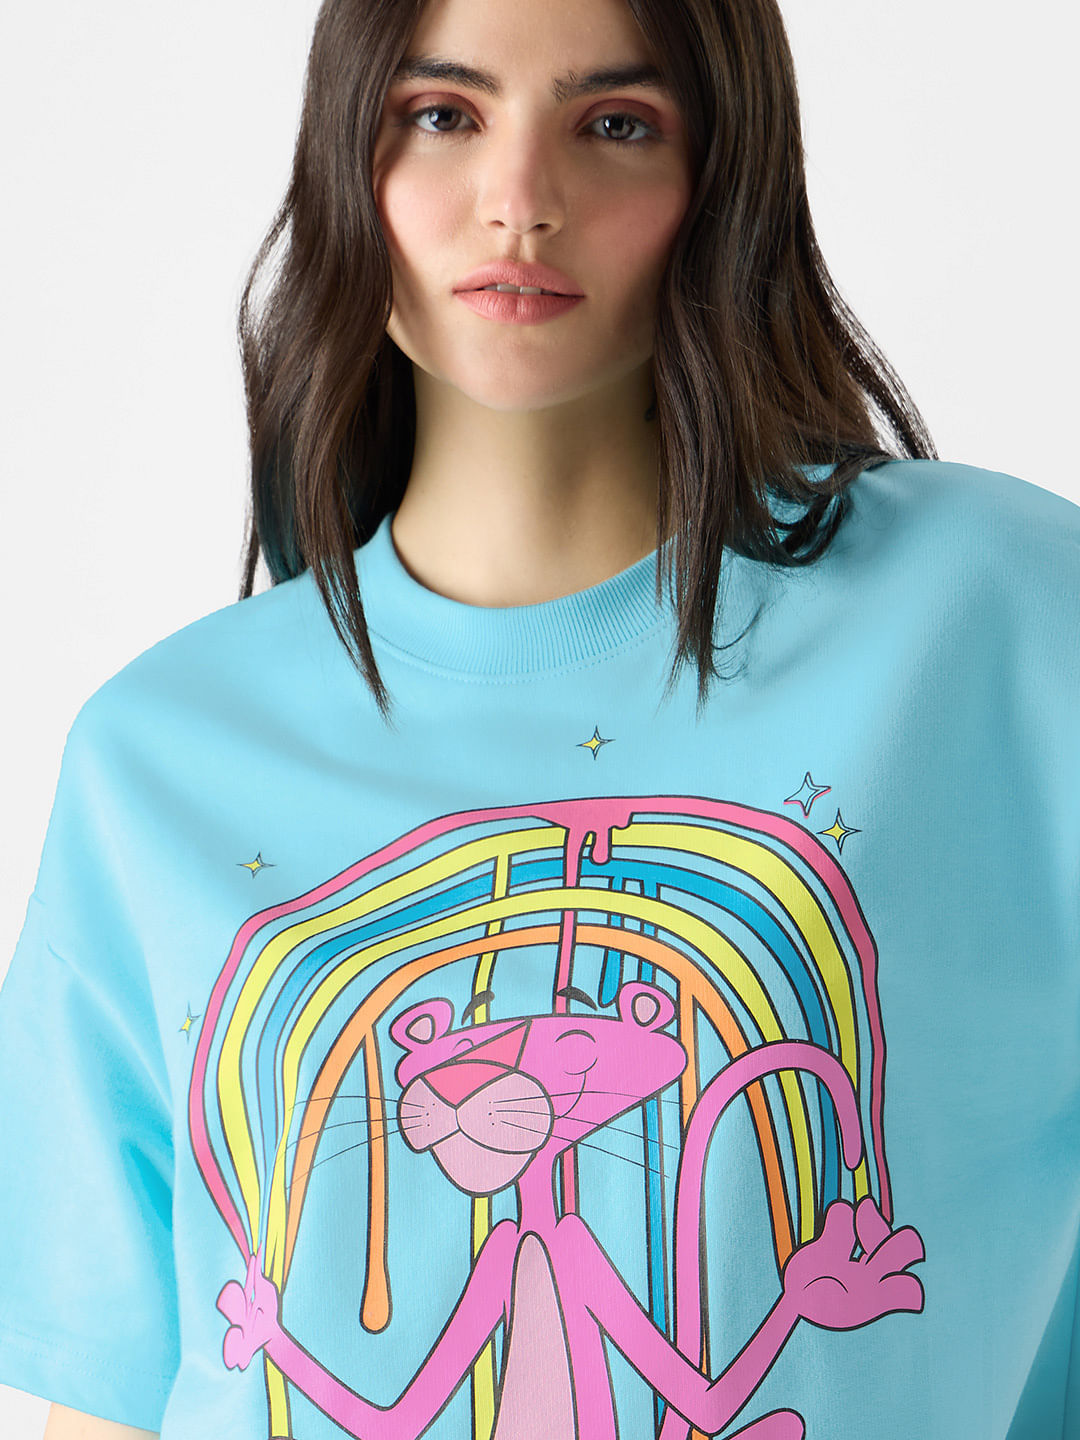 Buy Pink Panther: The Art Of Chilling Women Oversized T-Shirts Online